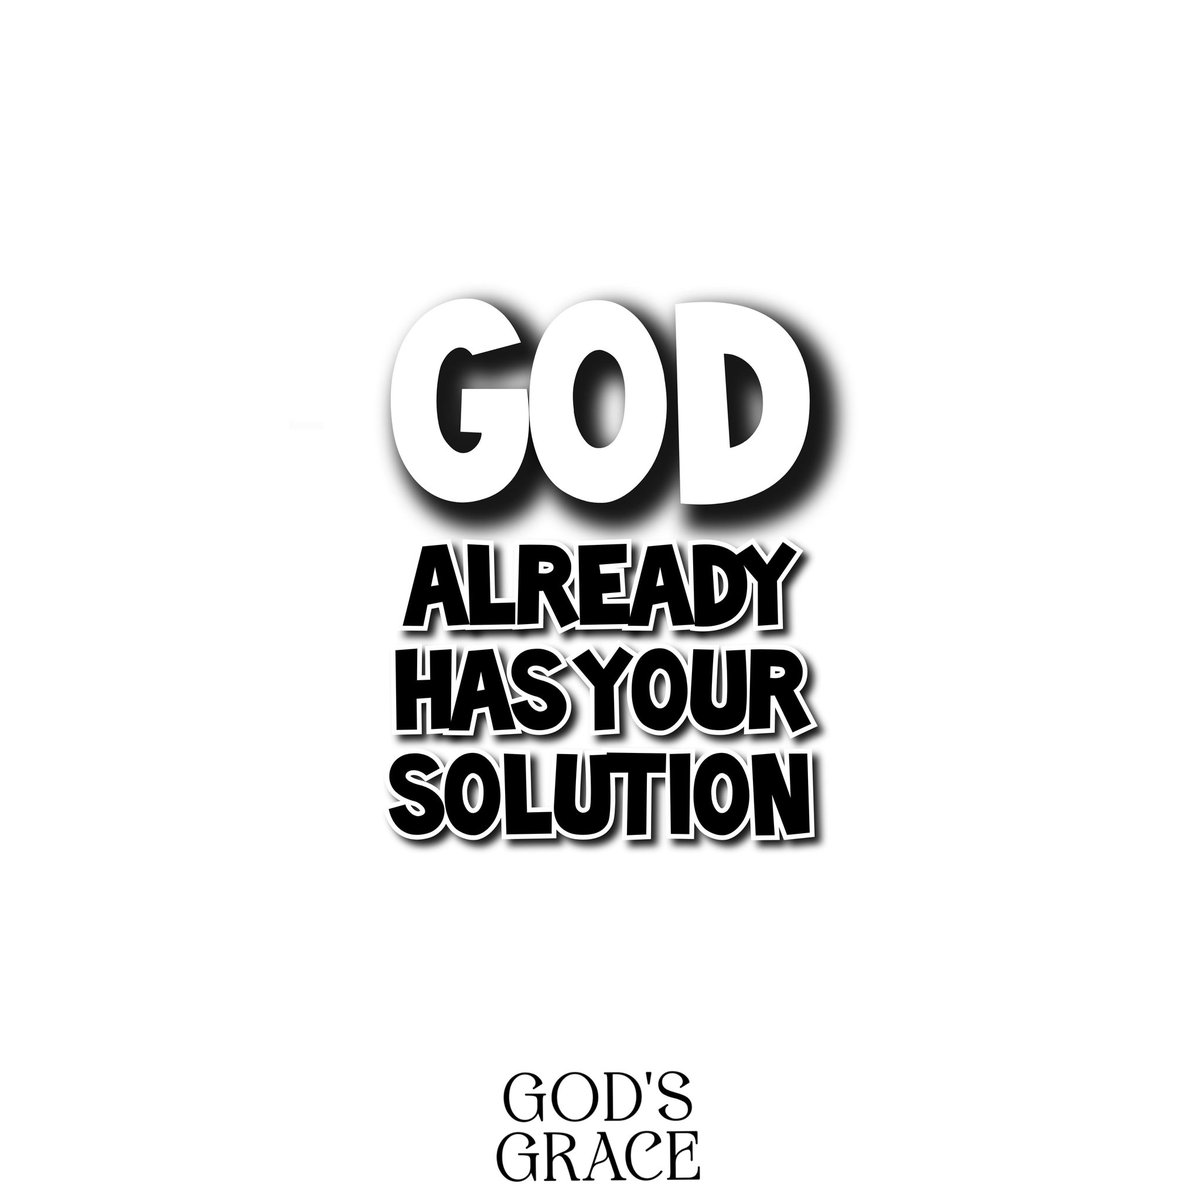 Before there is a problem, God has your solution.

#GodsGrace